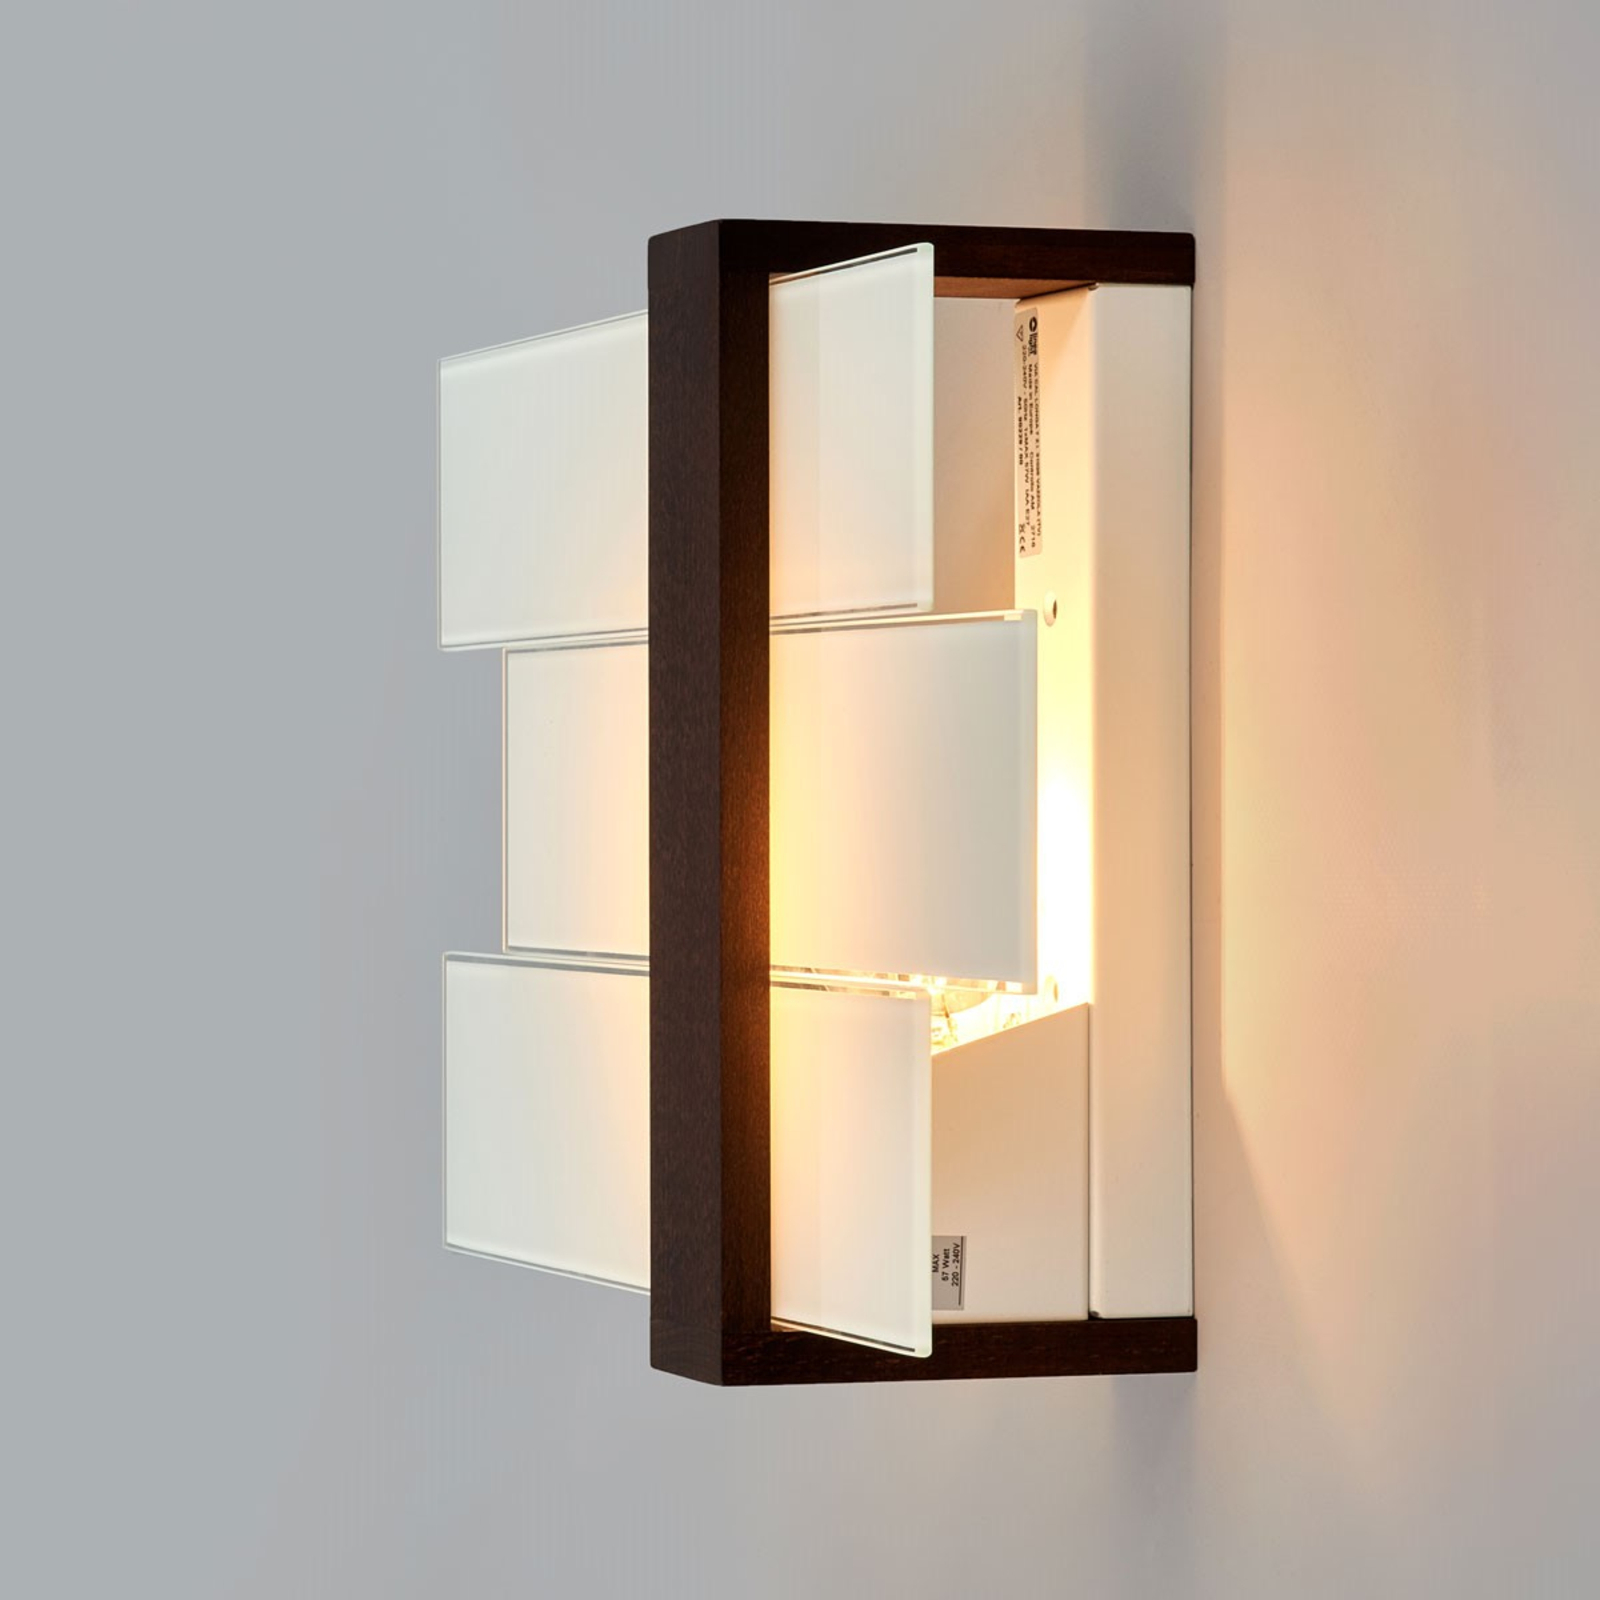 TRIAD - attractive wall and ceiling light